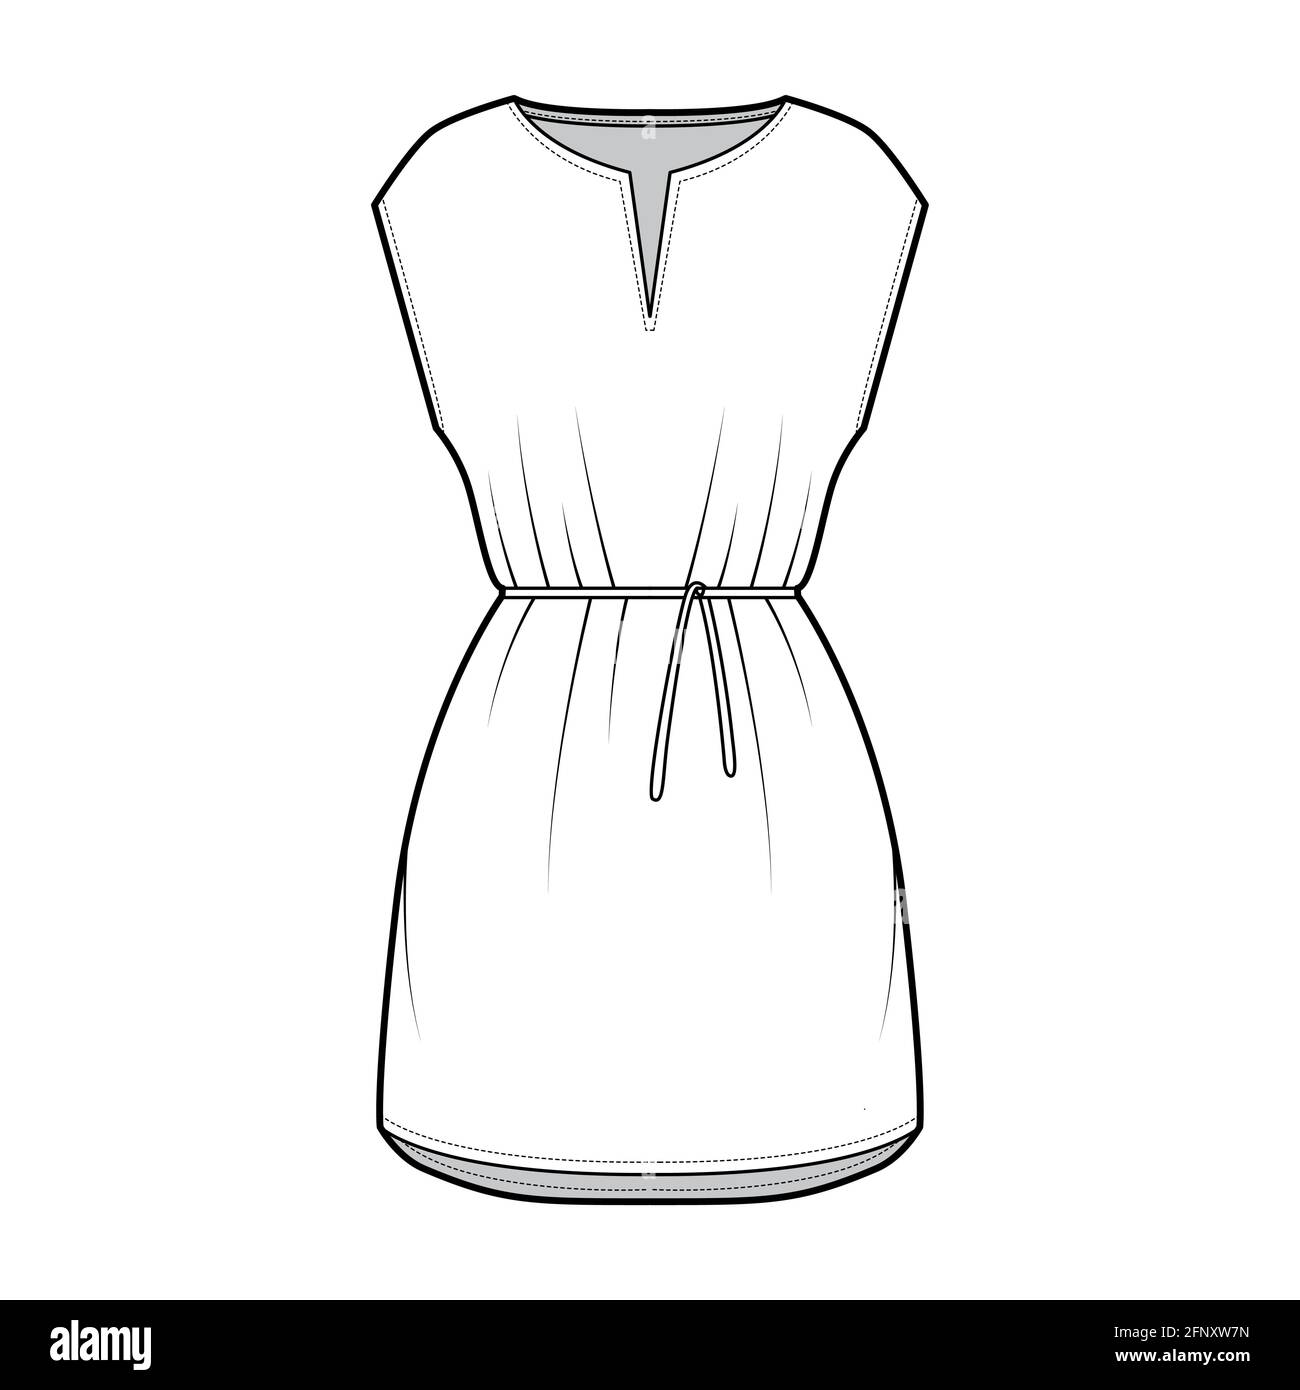 Dress tunic technical fashion illustration with tie, sleeveless, oversized body, mini length skirt, slashed neck. Flat apparel front, white color style. Women, men CAD mockup Stock Vector